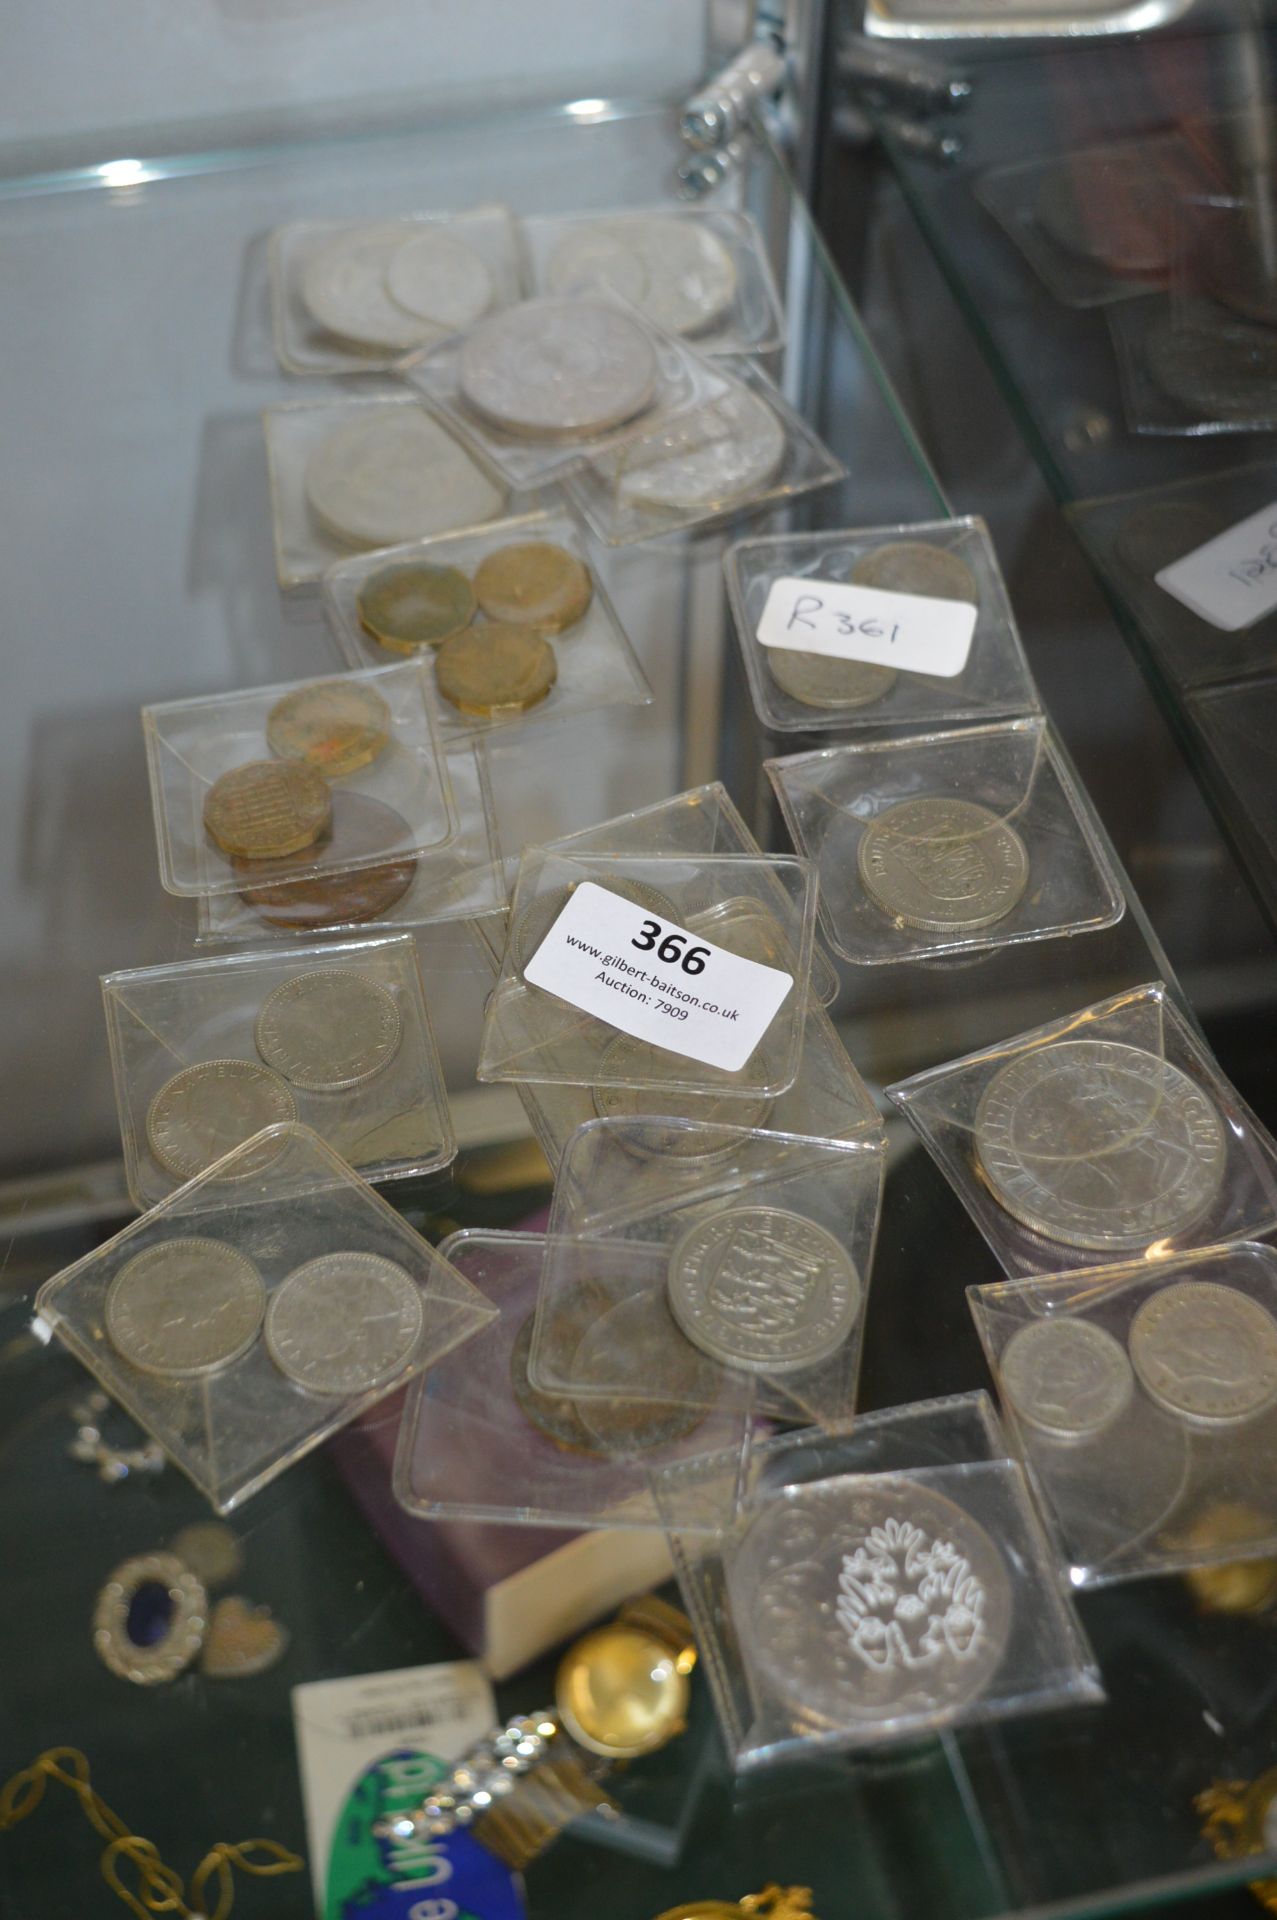 Collection of British Coins and Commemorative Coin